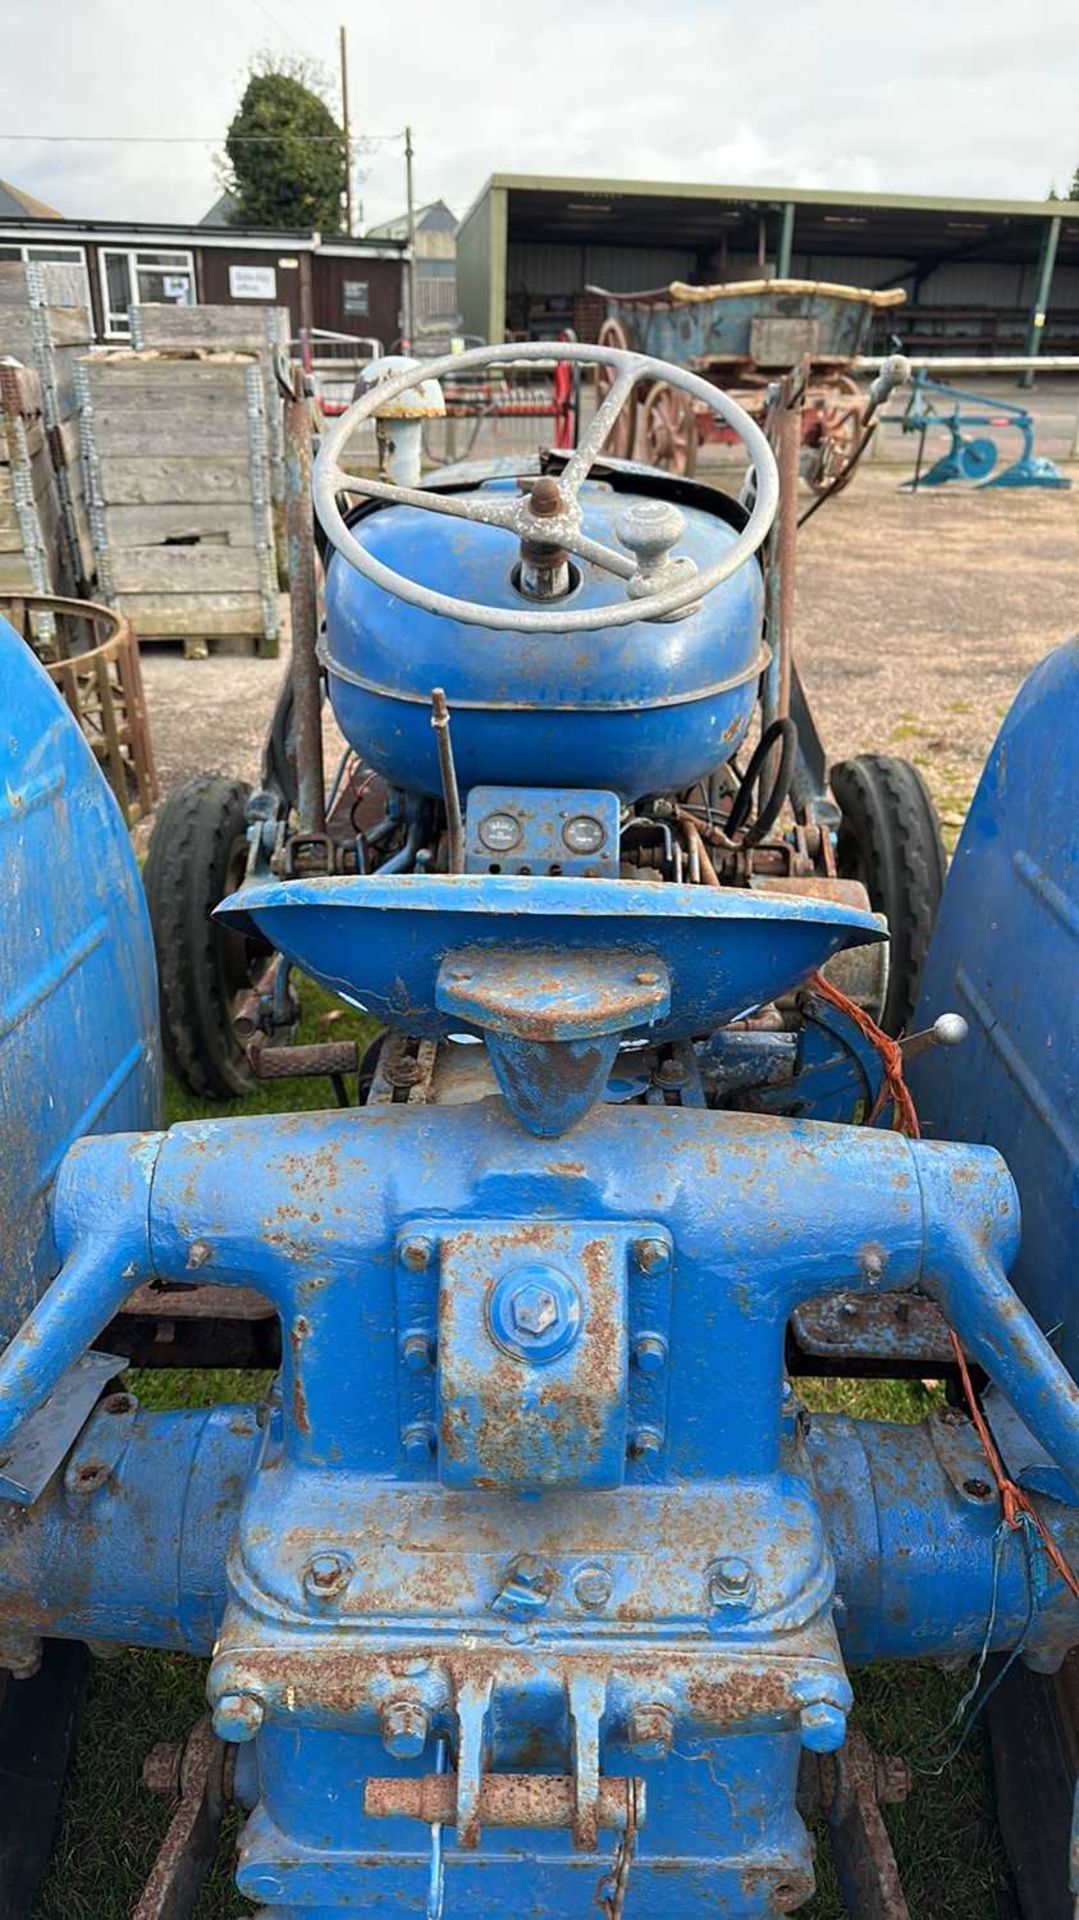 A Fordson Tractor with front loader arms, requiring full restoration - Image 14 of 14